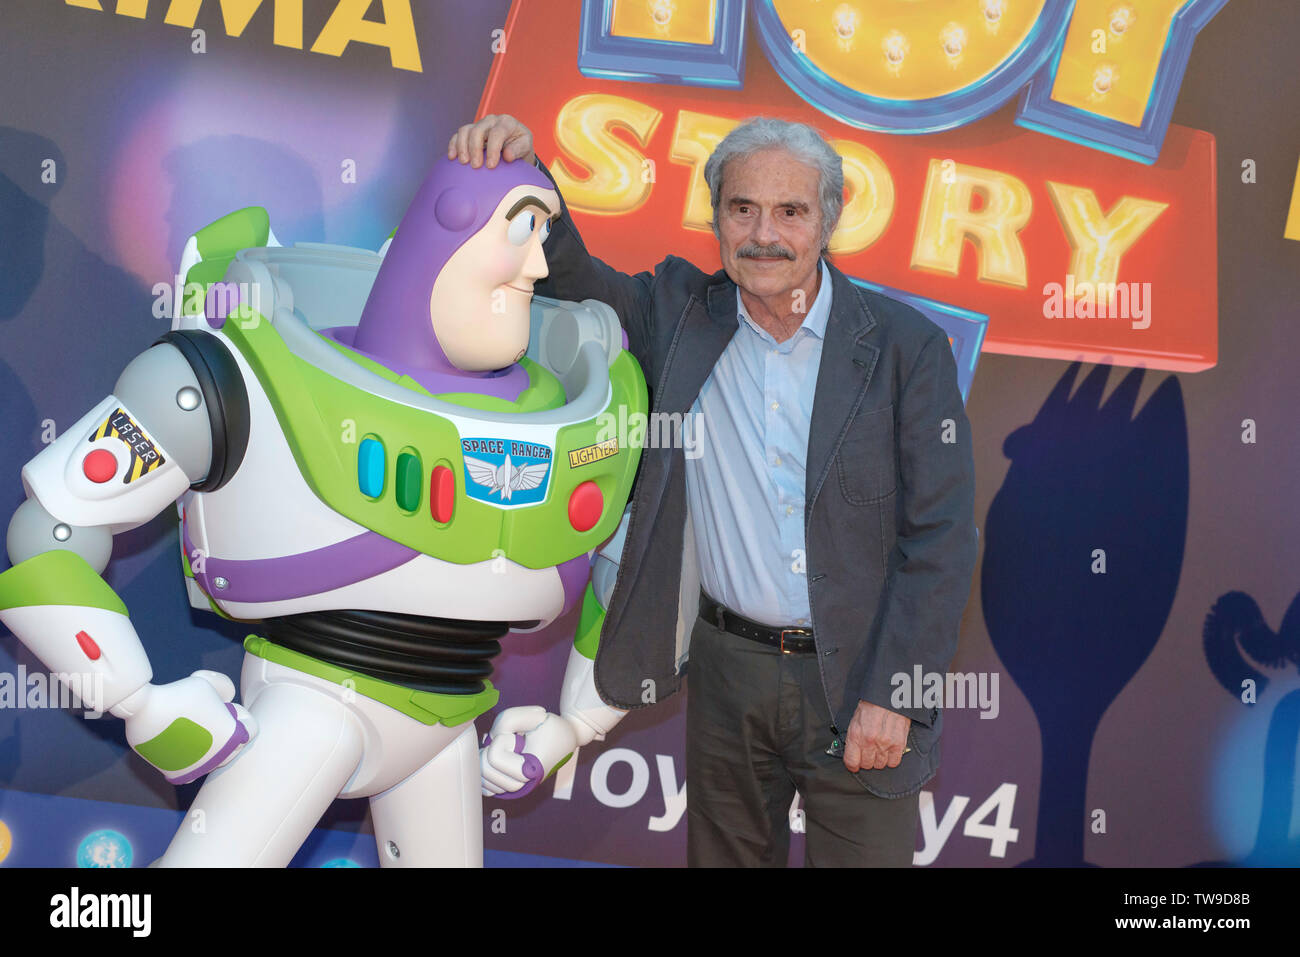 Italian tv celebrities attend the red carpet of Toy Story 4 at Studios in Rome Stock Photo